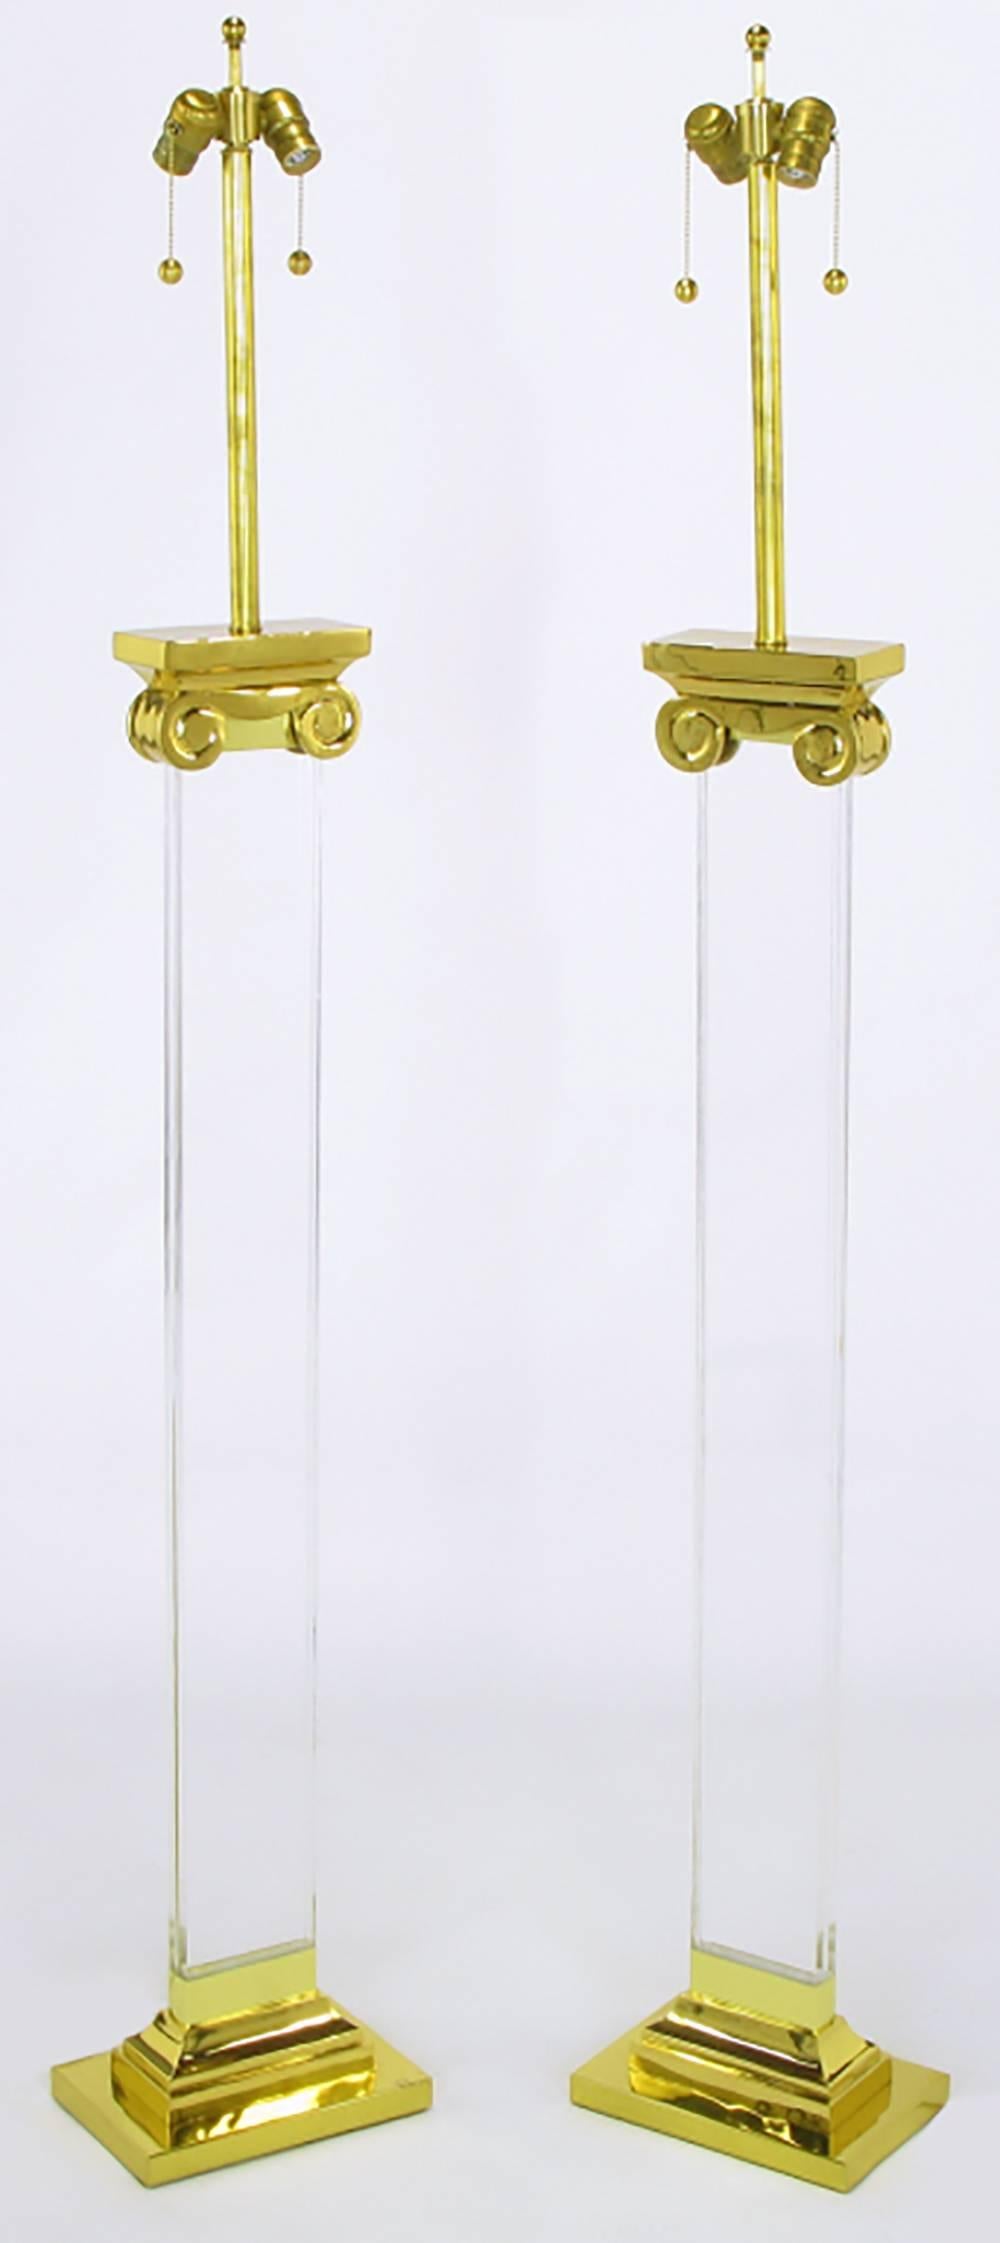 Neoclassical pair of acrylic and brass ionic column floor lamps. Brass base and capitals, double socket cluster and stem with one inch thick Lucite column body.